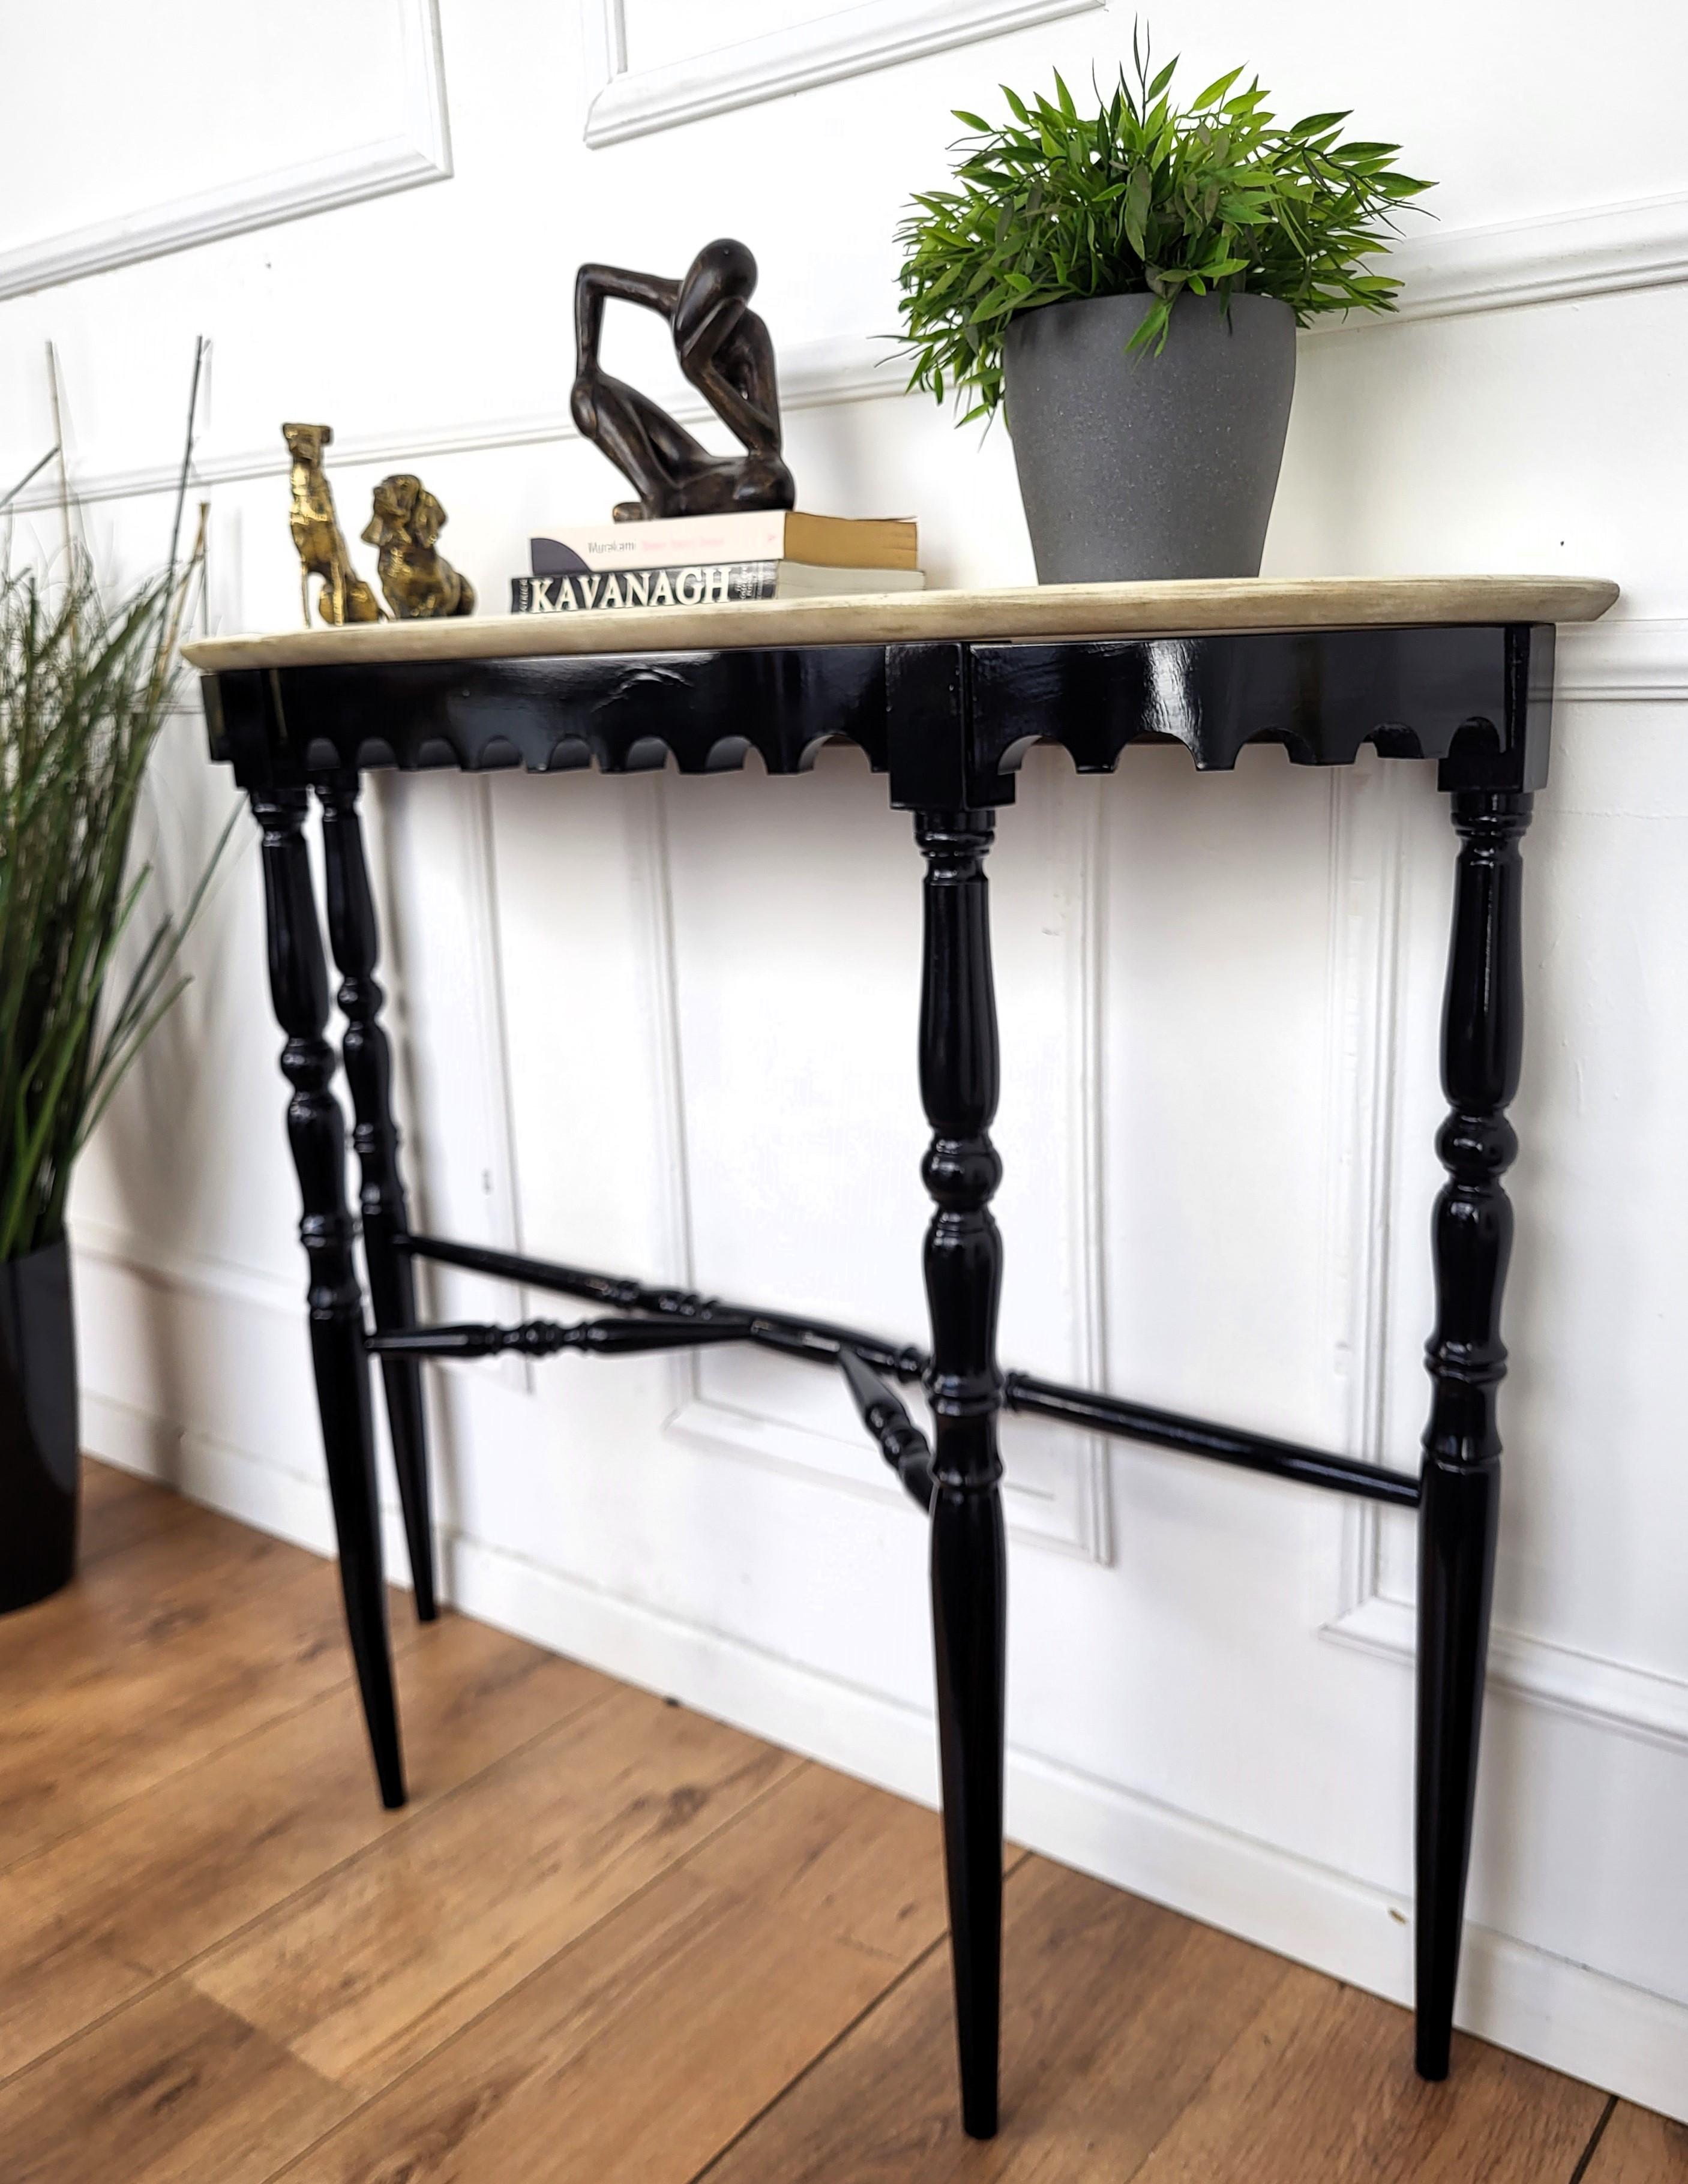 Very elegant and refined Italian 1950s Mid-Century Modern and neoclassical design console table. The four stunning carved shaped legs connected by central stretcher and with its typical white Carrara marble top give this console an extremely light